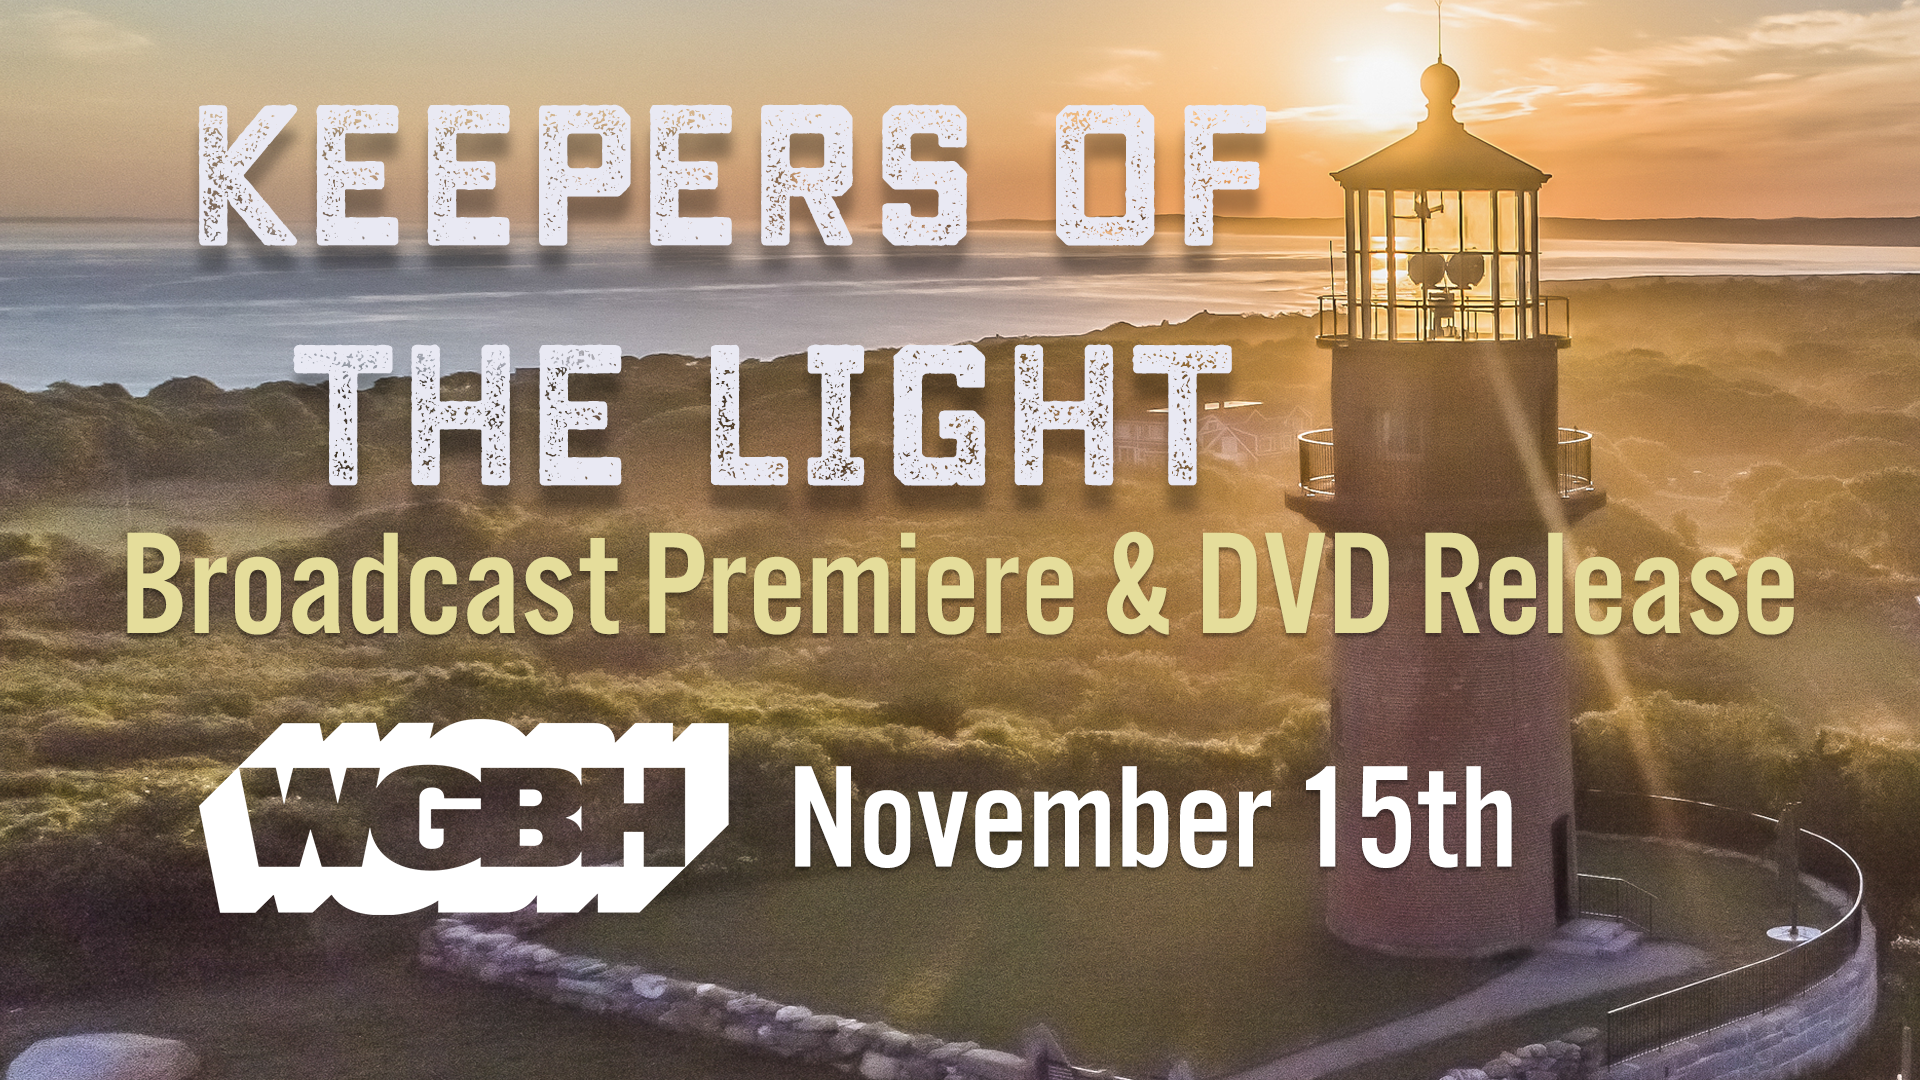 Tune in to PBS’s WGBH on 11/15 for the broadcast premiere of “Keepers of the Light” – DVD release to follow!